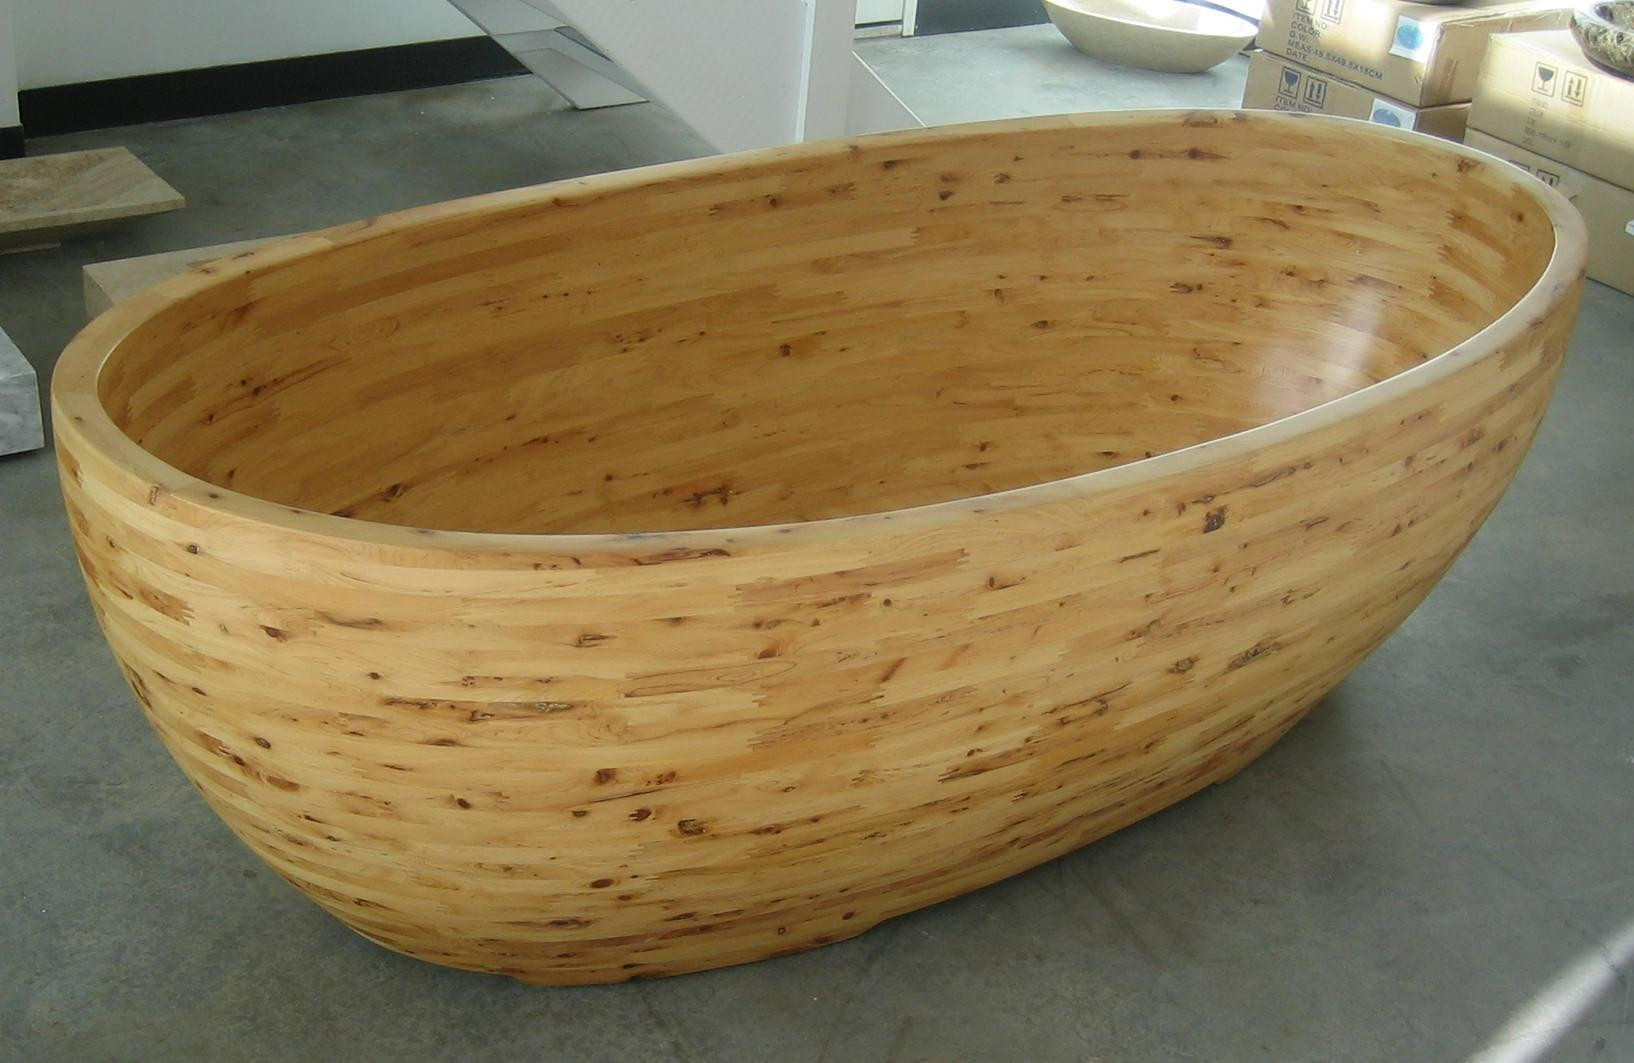 Wooden Bathtub DIY
 How To Build A Wooden Bathtub Stool – Loccie Better Homes